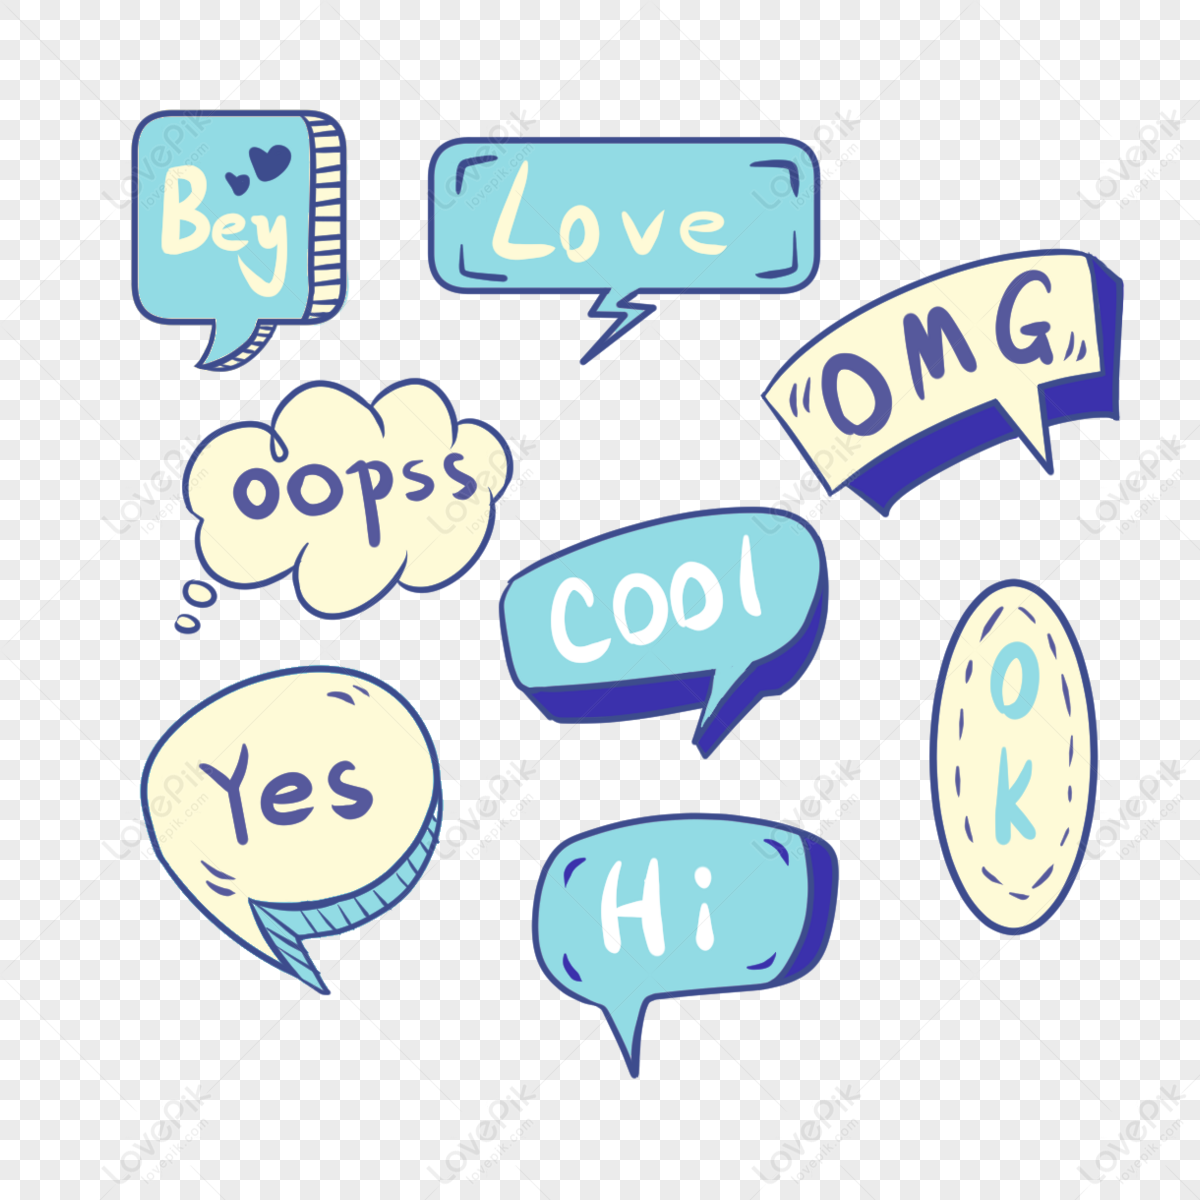 Scrapbook Stickers PNG Images With Transparent Background